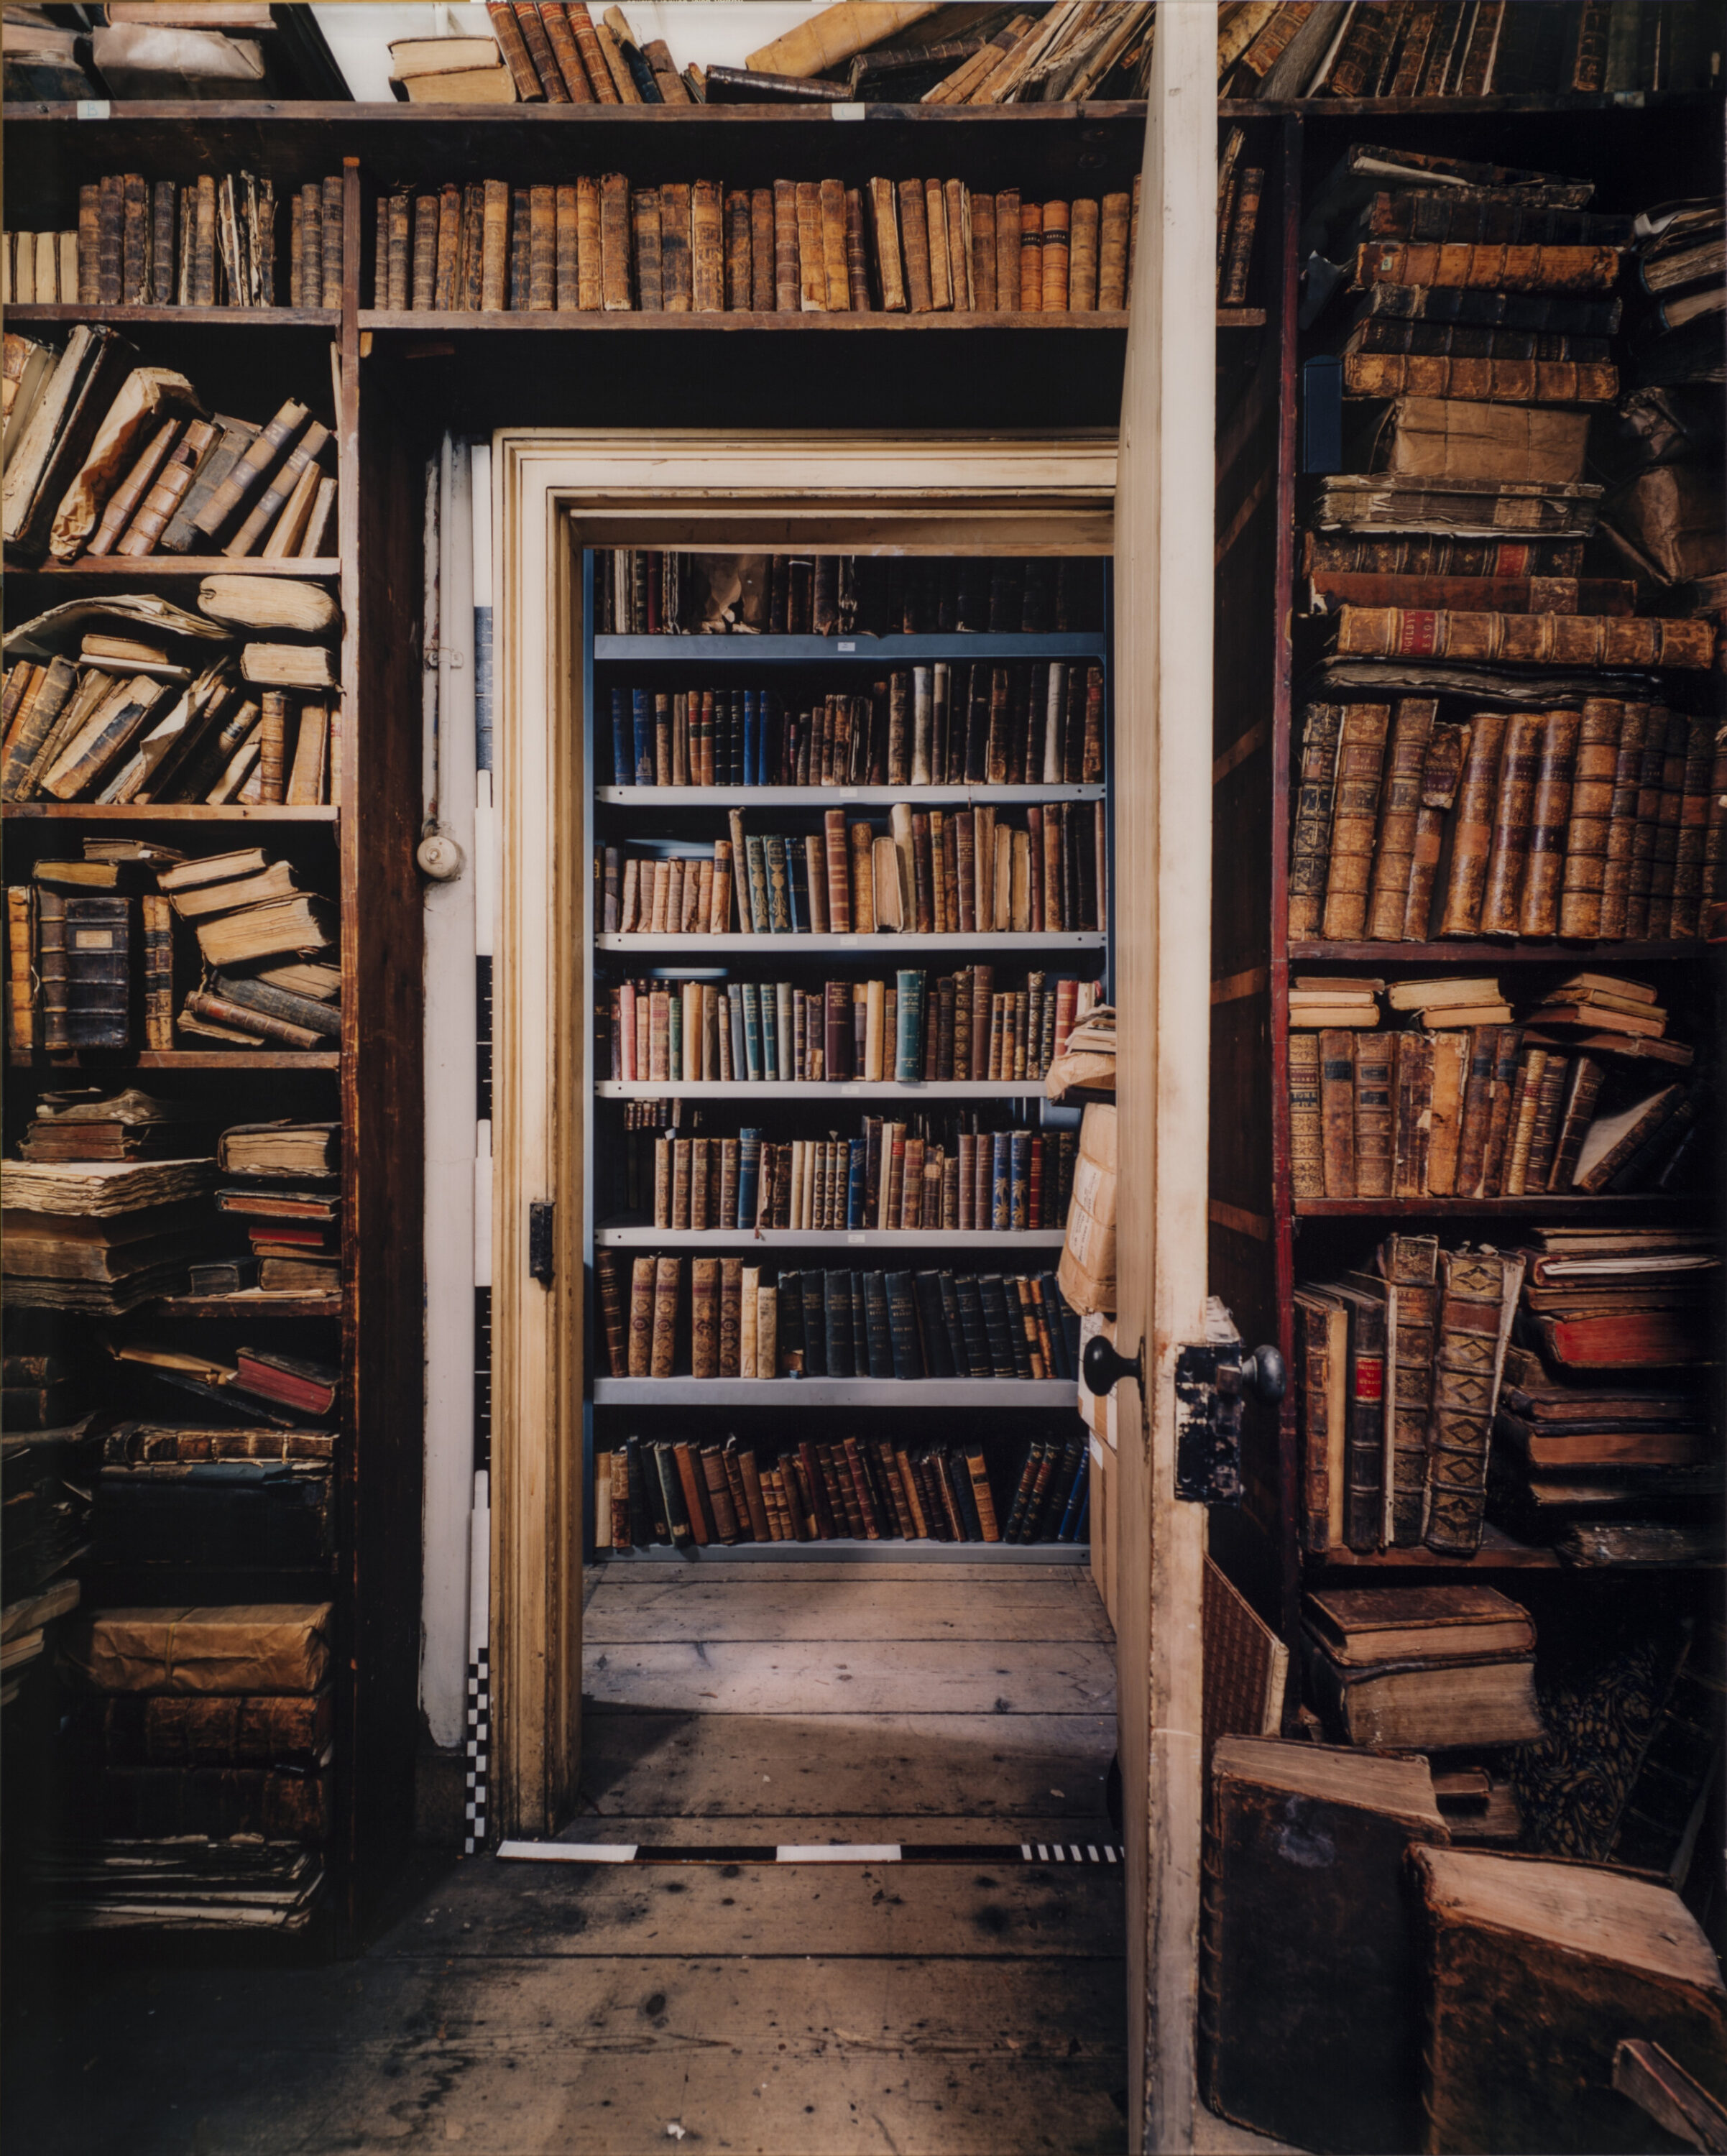 Color photograph of room with old books on bookshelves that stretch from floor to ceiling. In the center is an open door revealing another room with floor to ceiling shelves filled with books.